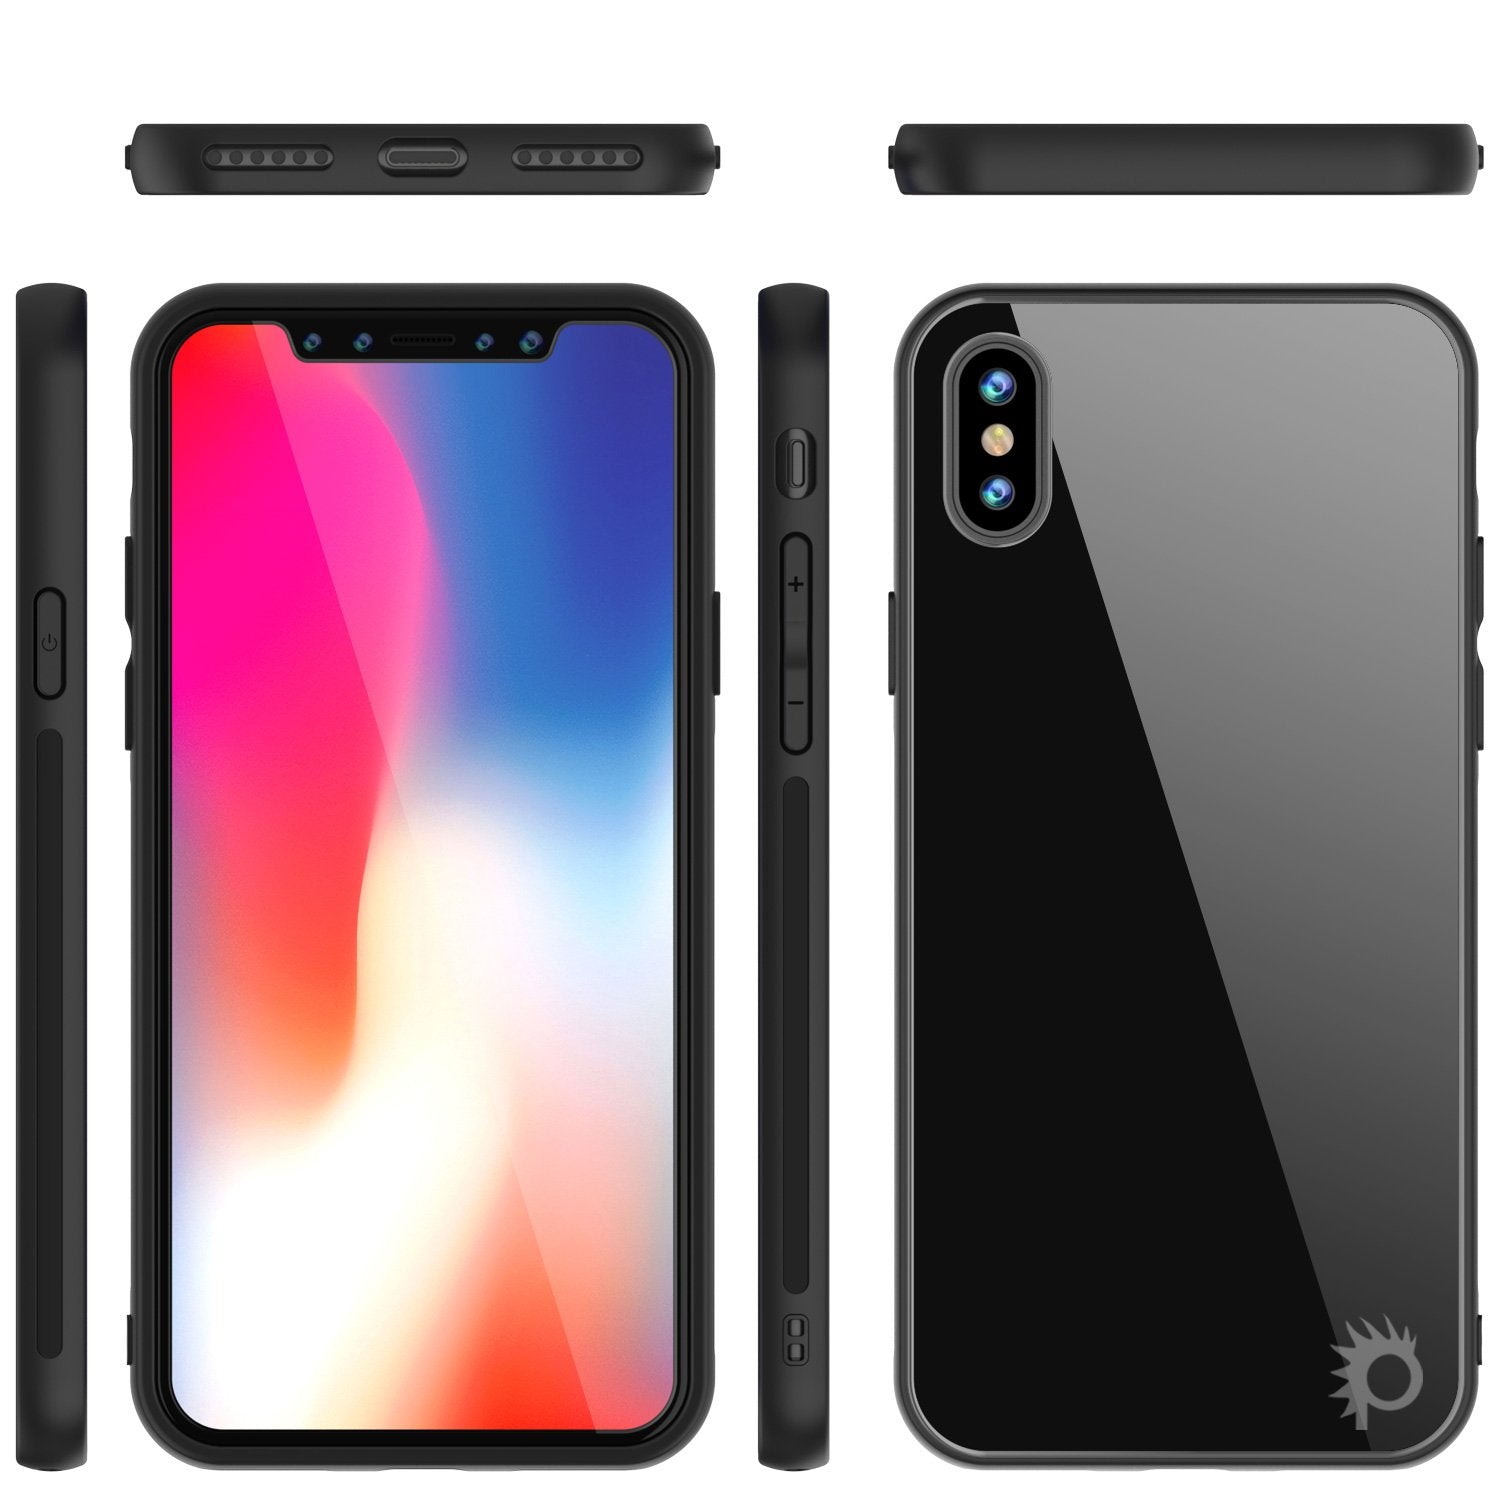 iPhone X Case, Punkcase GlassShield Ultra Thin Protective 9H Full Body Tempered Glass Cover W/ Drop Protection & Non Slip Grip for Apple iPhone 10 [Black] - PunkCase NZ